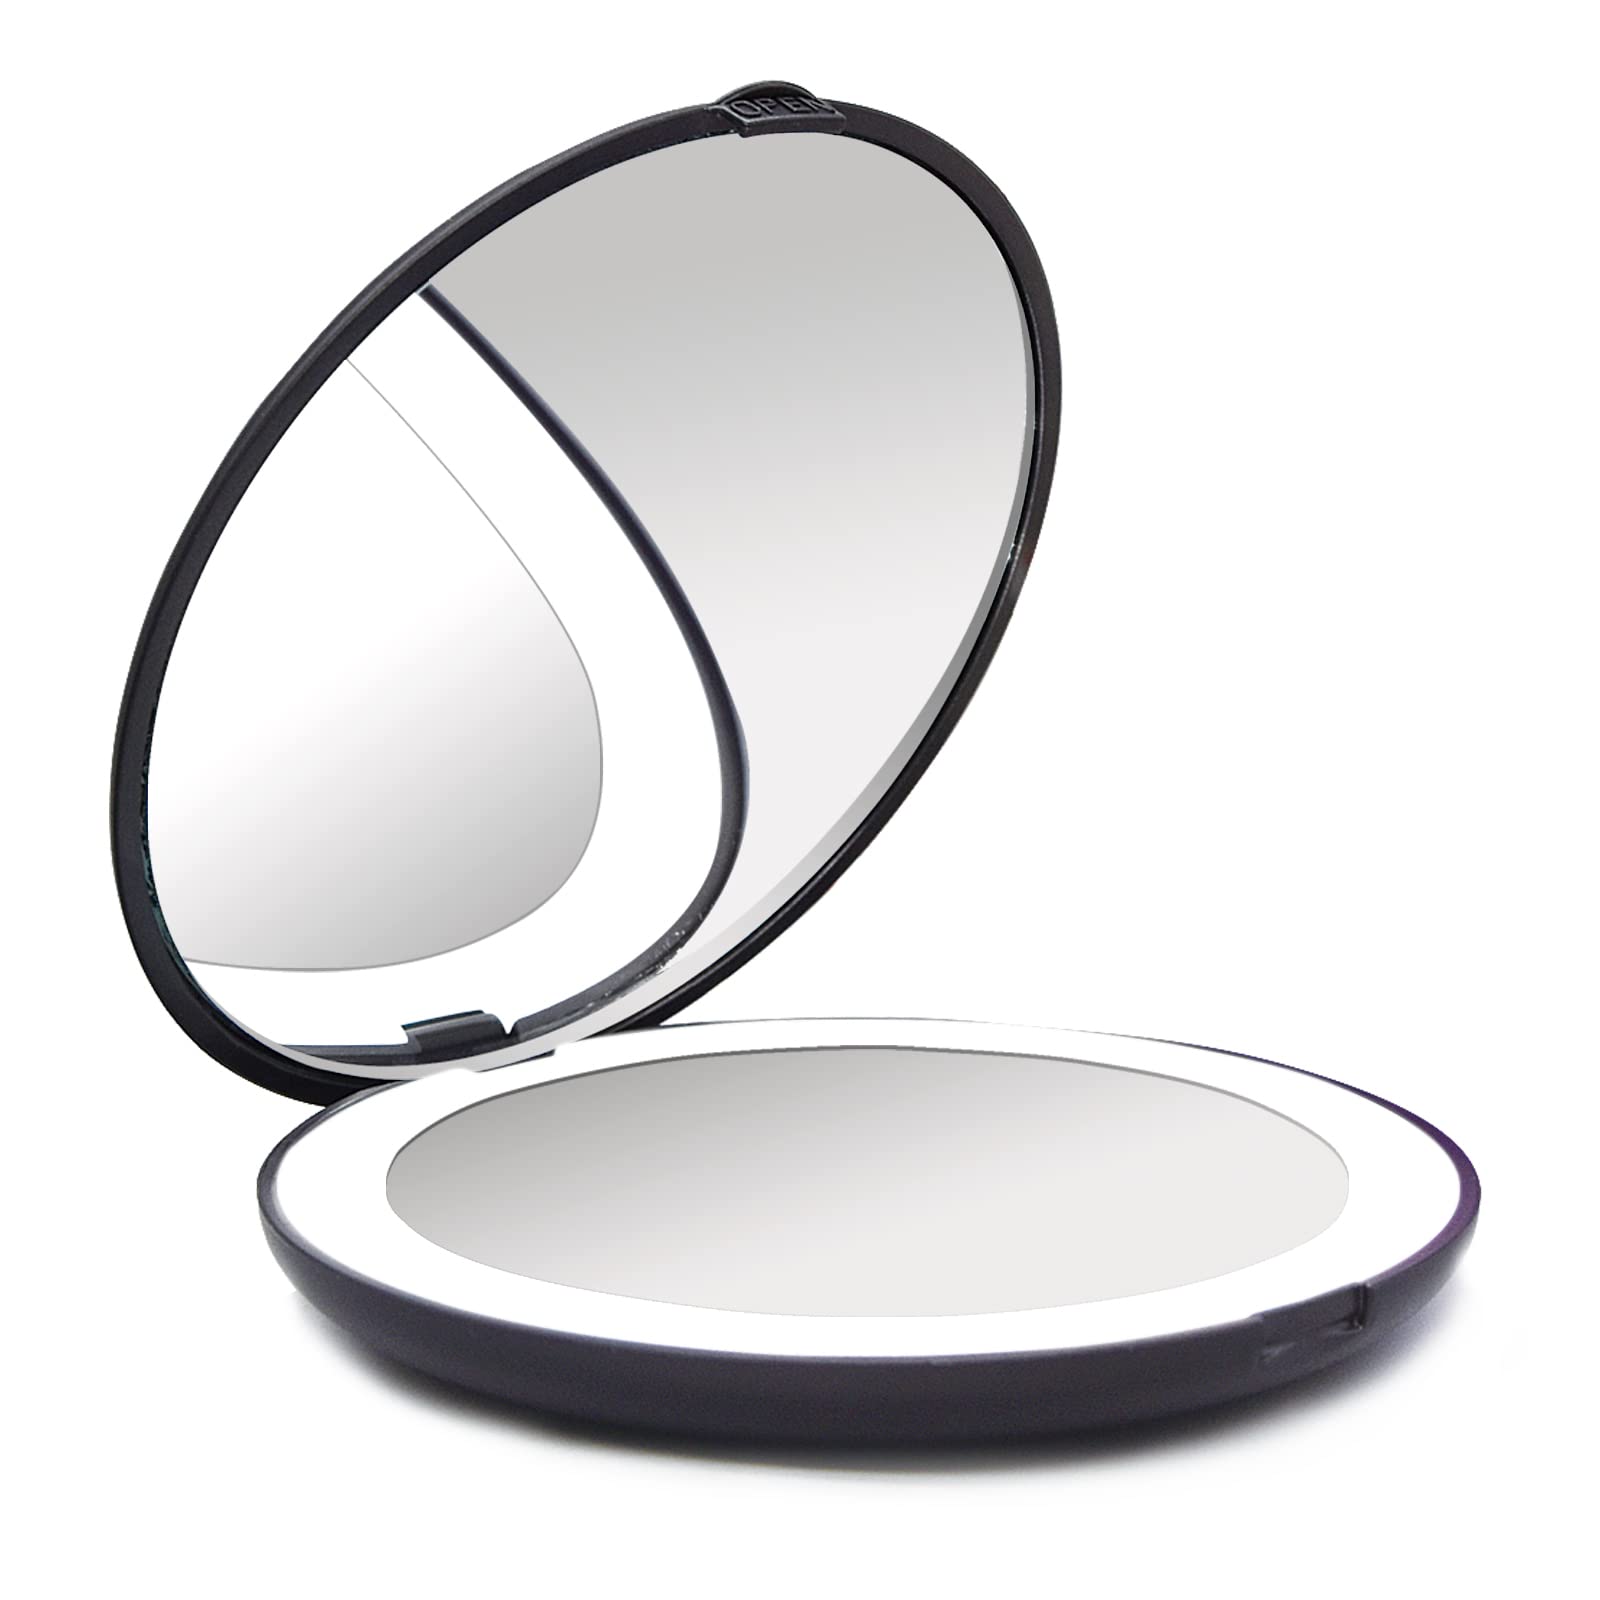 LED Compact Mirror, WOBANE Lighted Travel Mirror, 10X Magnifying ...